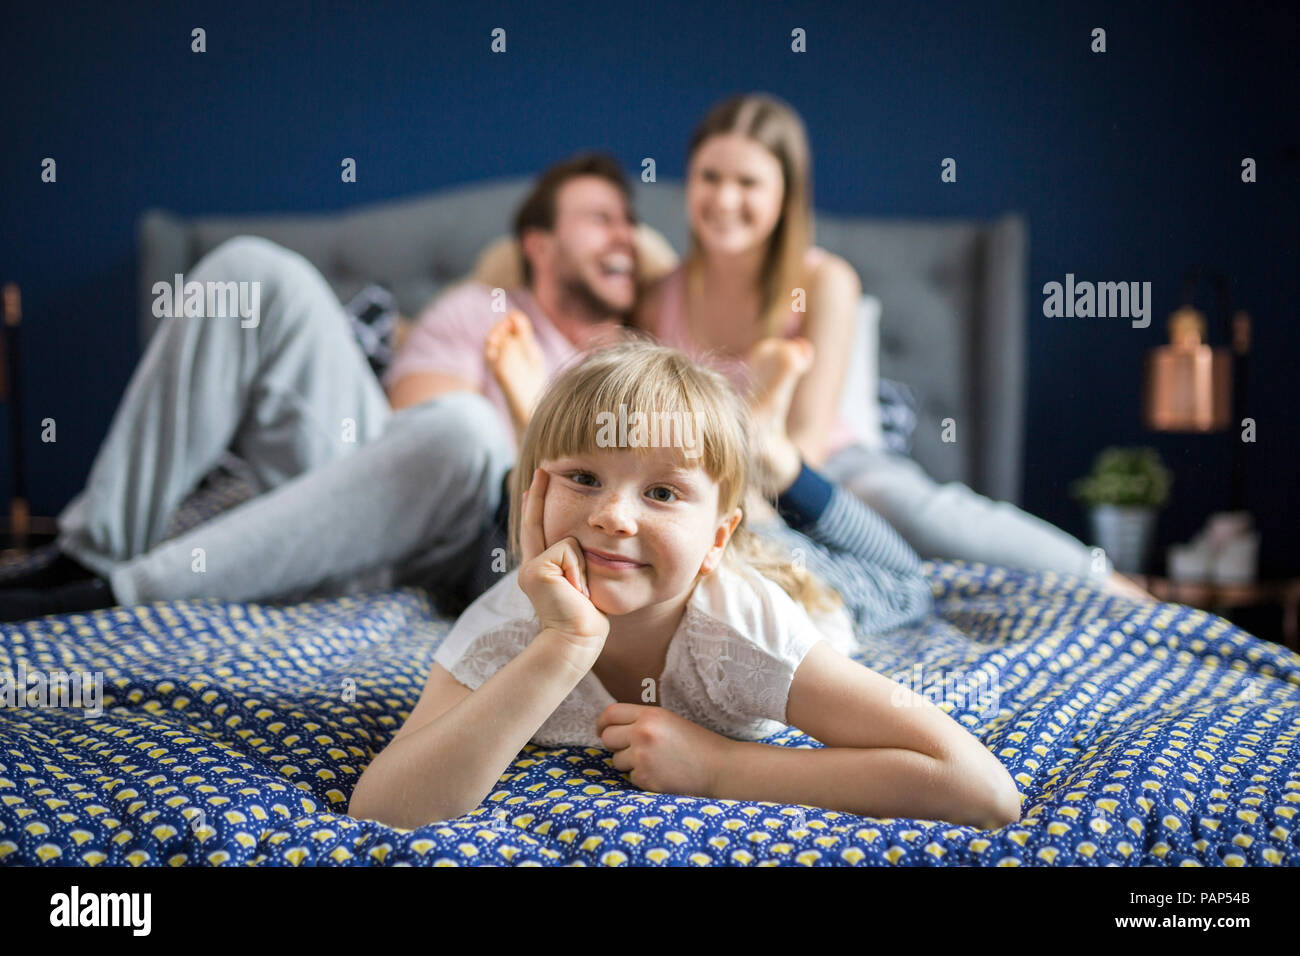 Cheeky little girl lying on bed with her parents Stock Photo